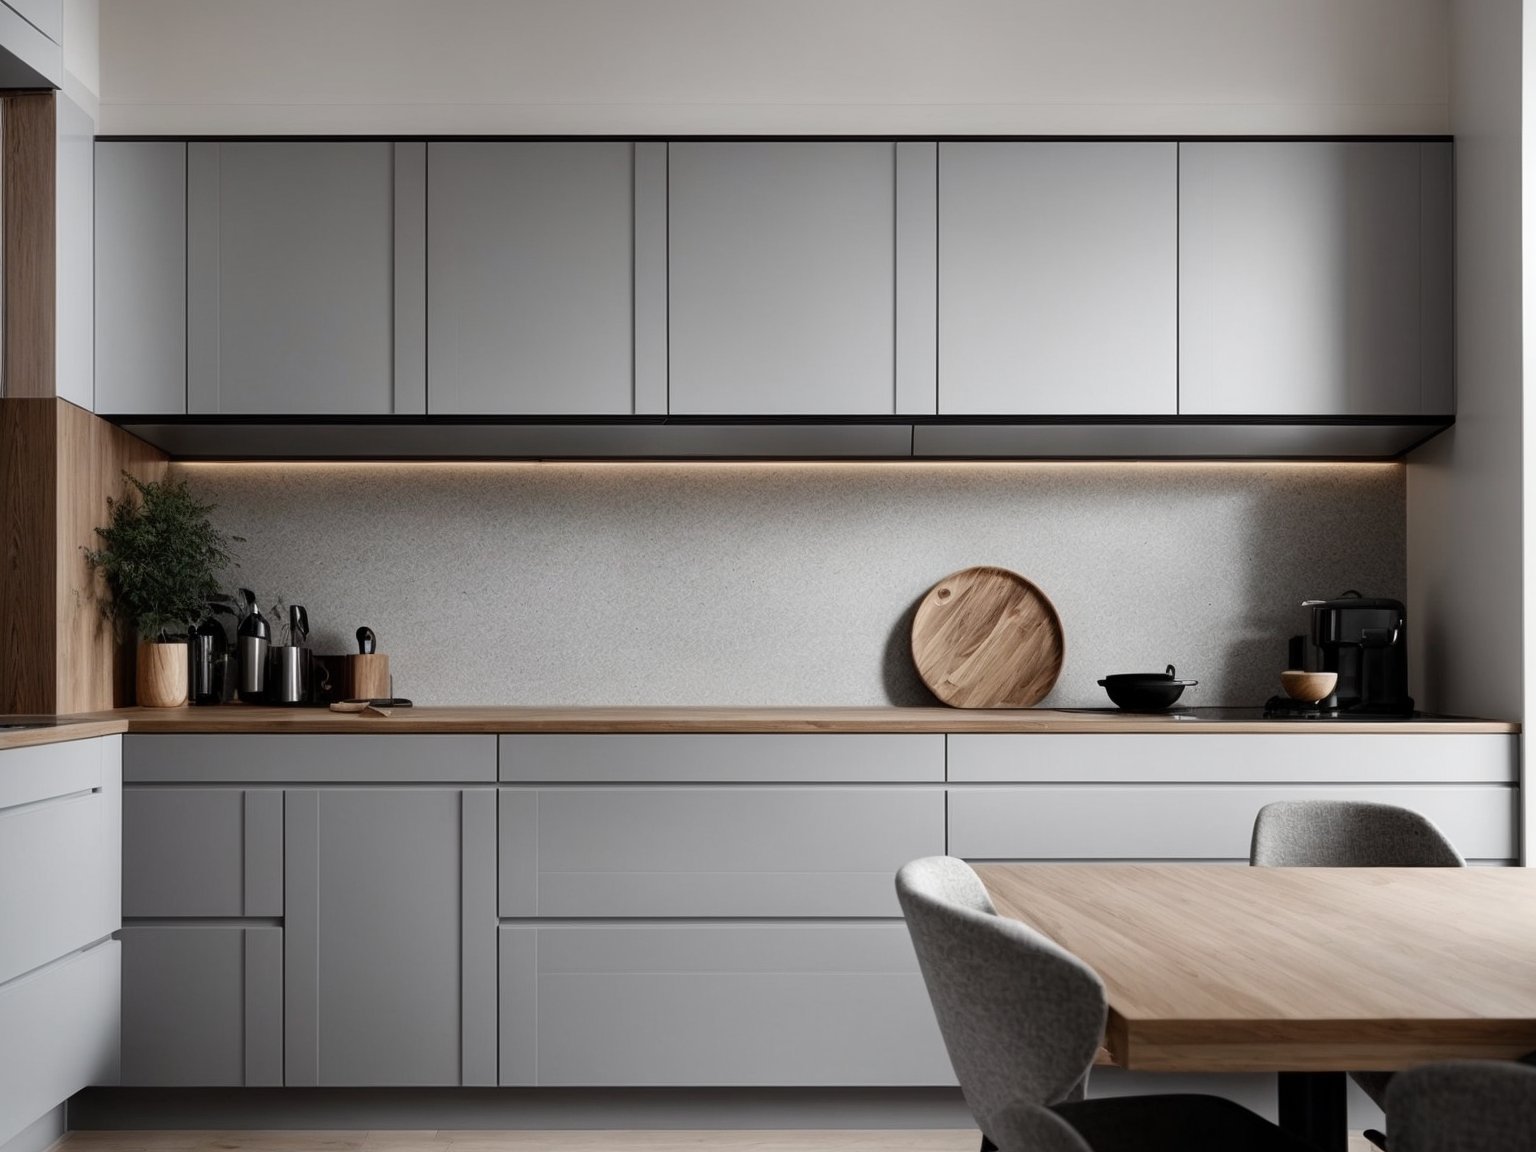 A photo of modern light grey kitchen cabinets with sleek, silver hardware